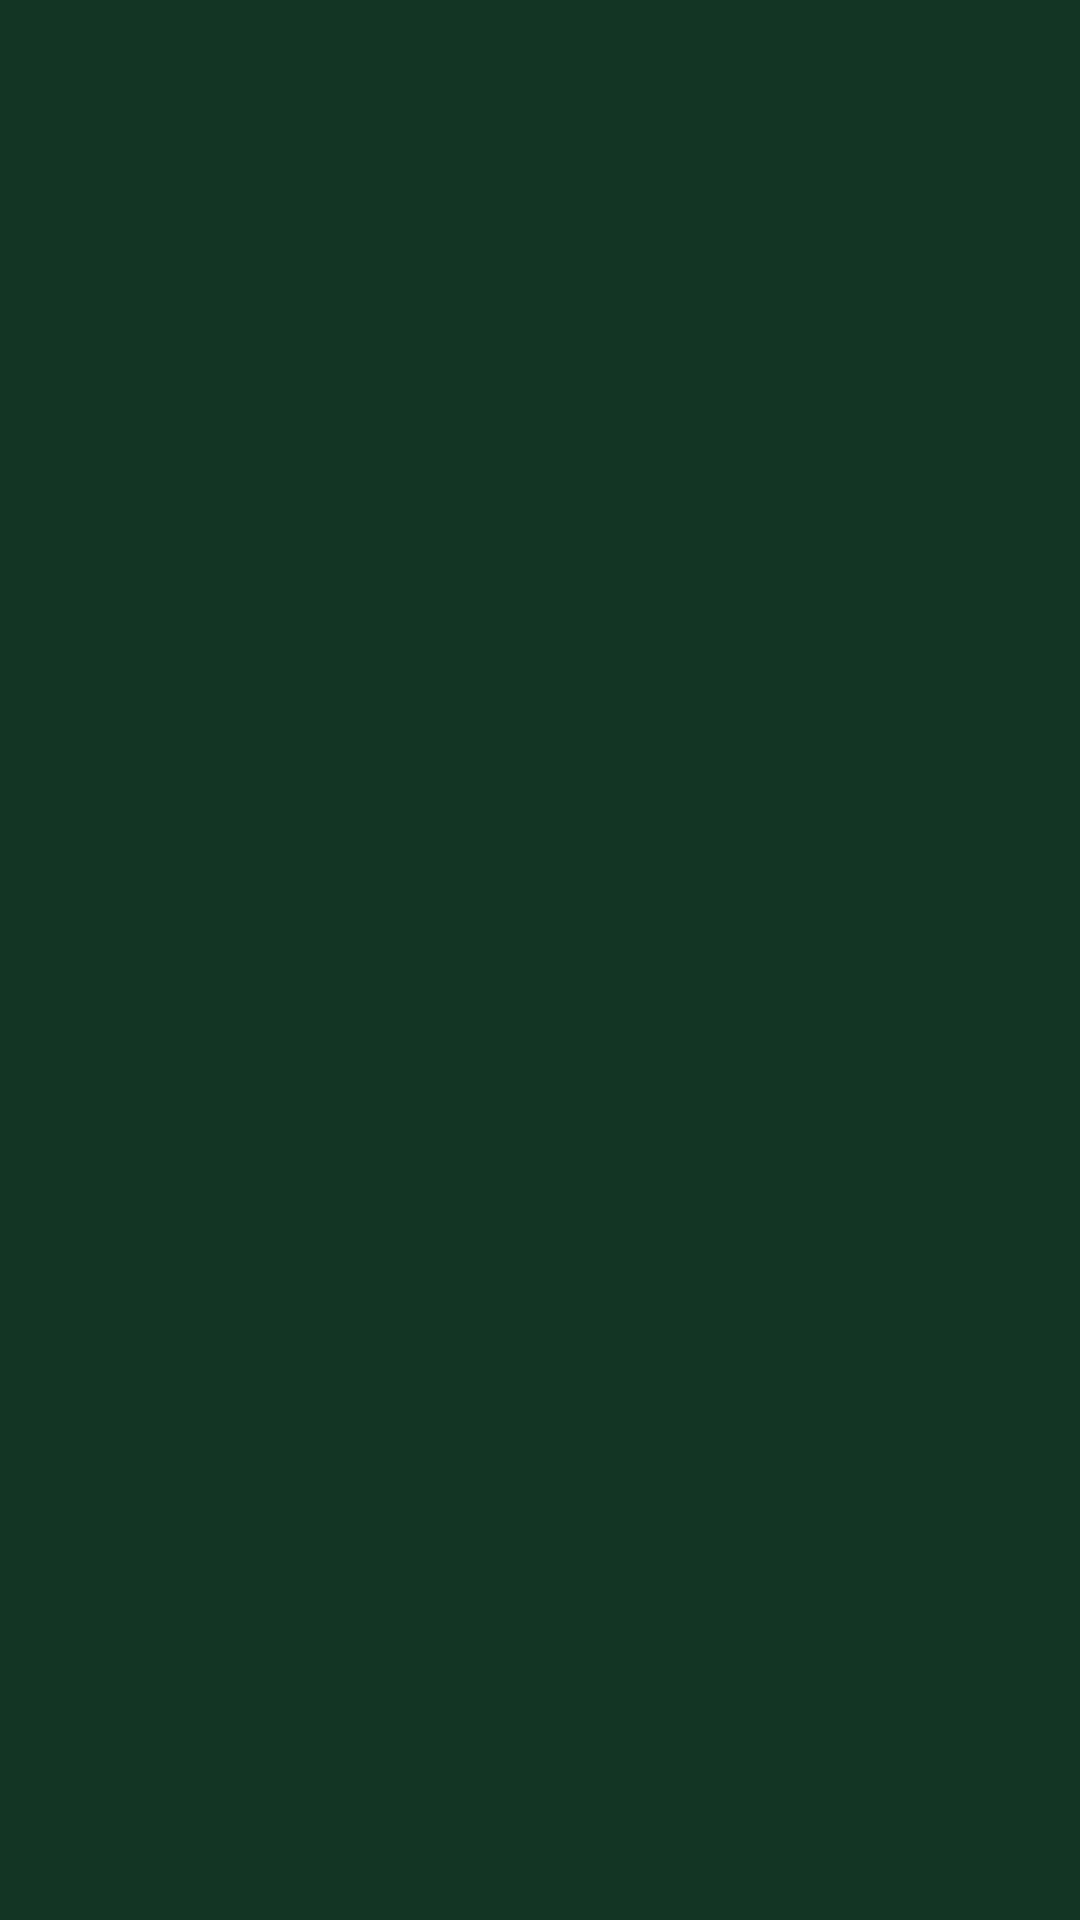 1080x1920 Phthalo Green Solid Color Background